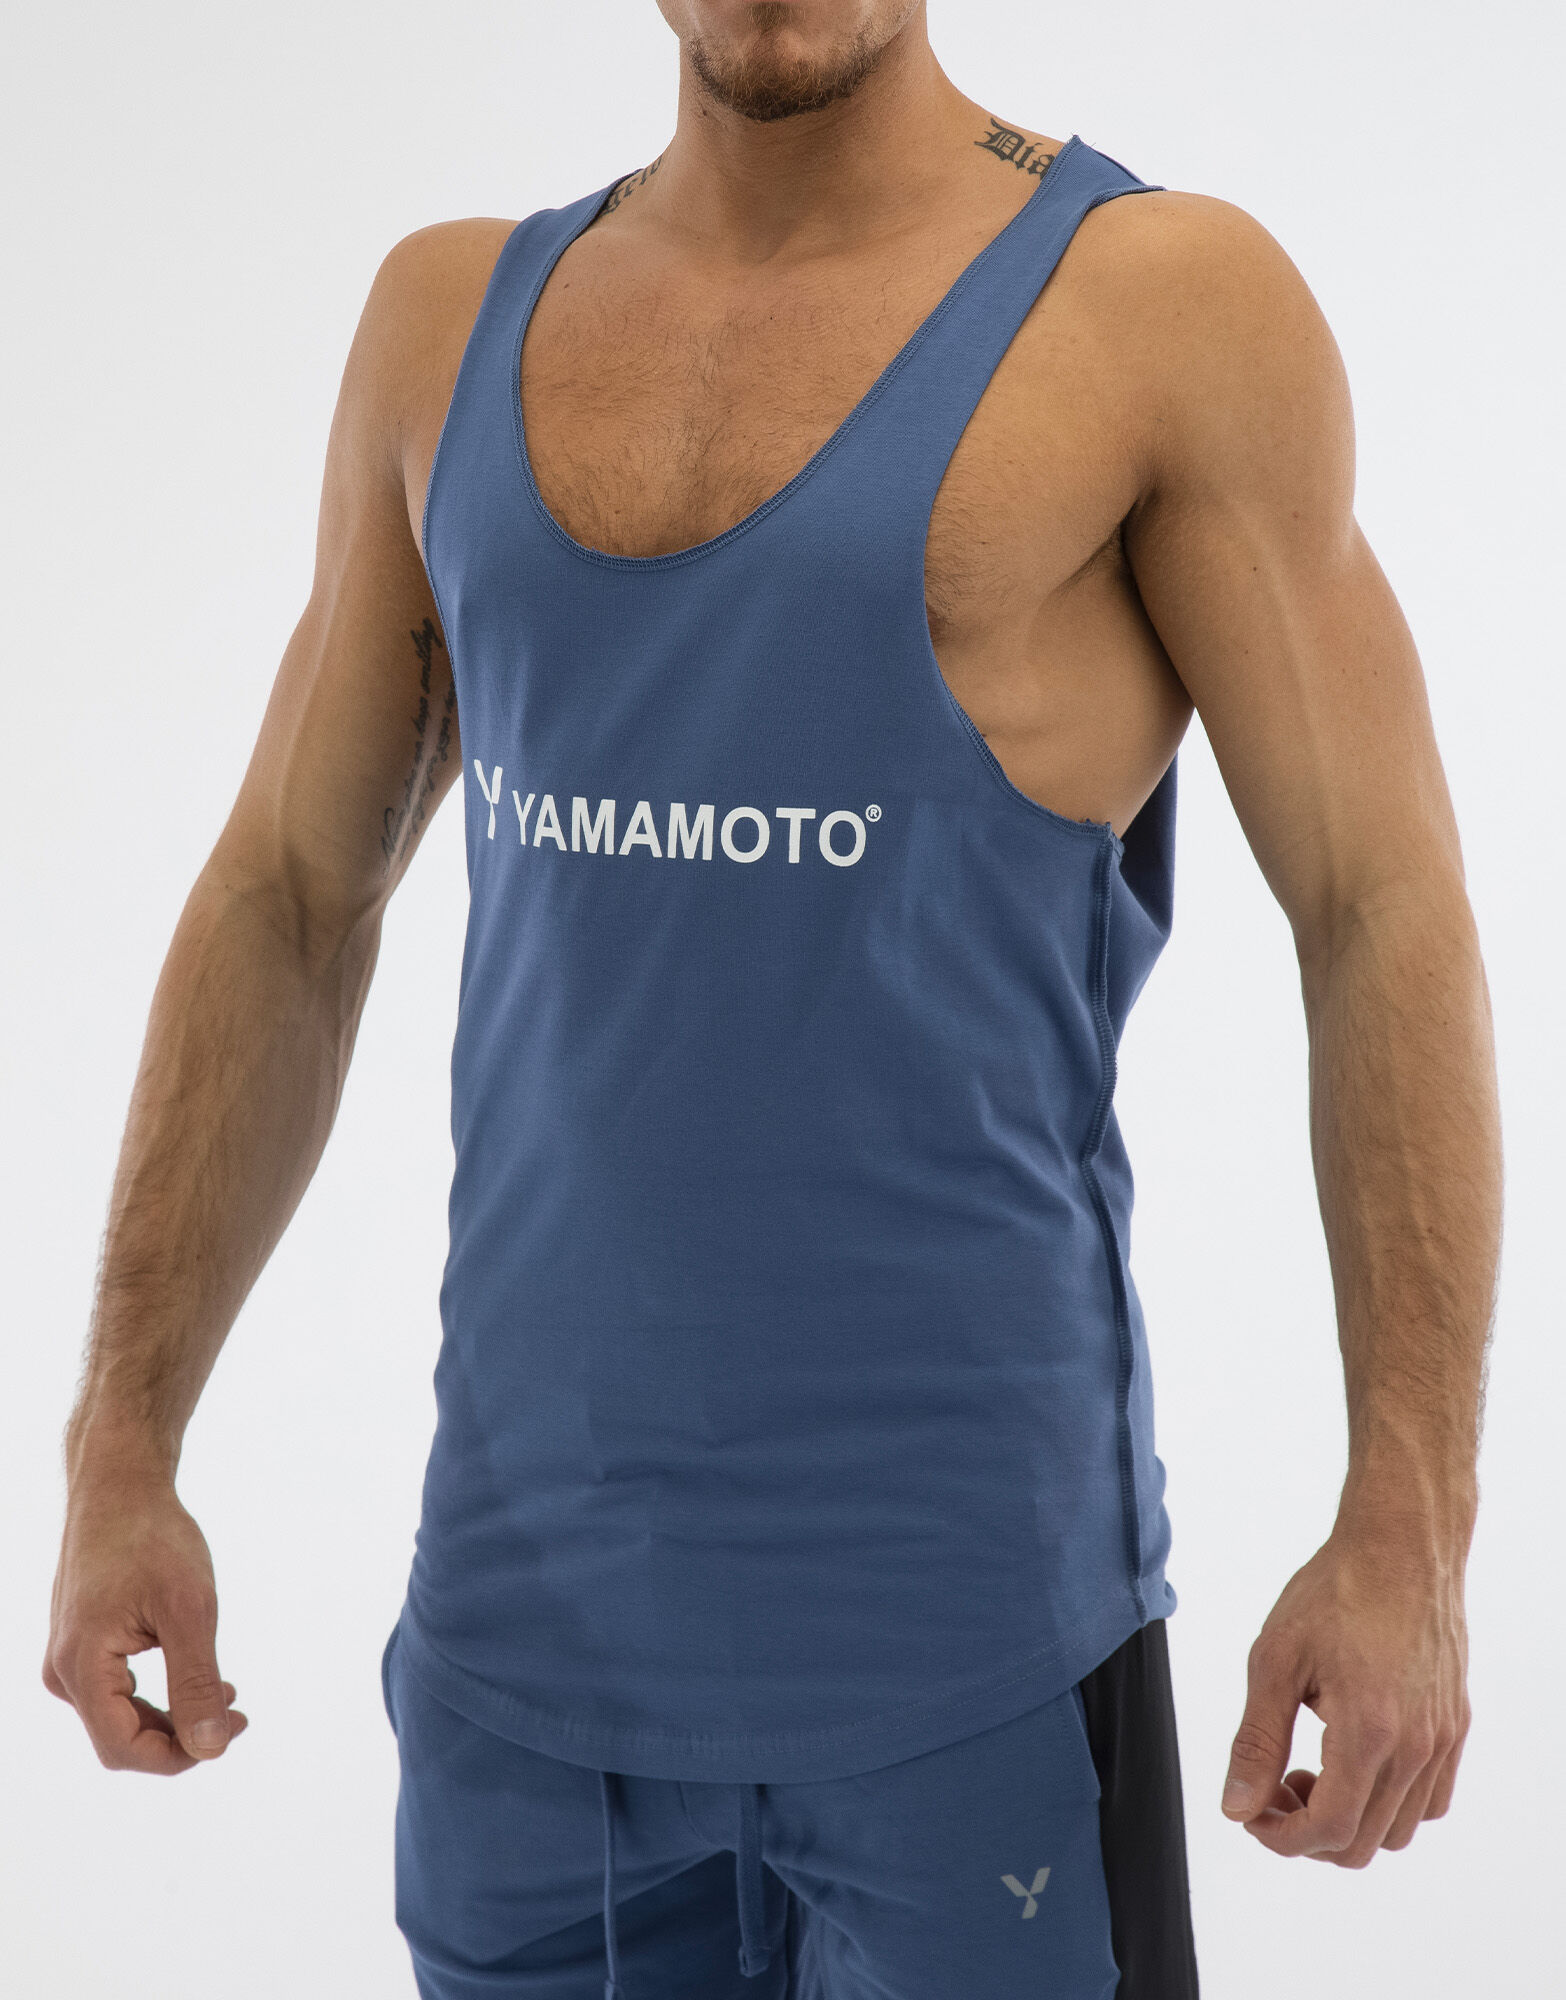 YAMAMOTO OUTFIT Man Tank Top Wide Shoulder Colore: Blu S